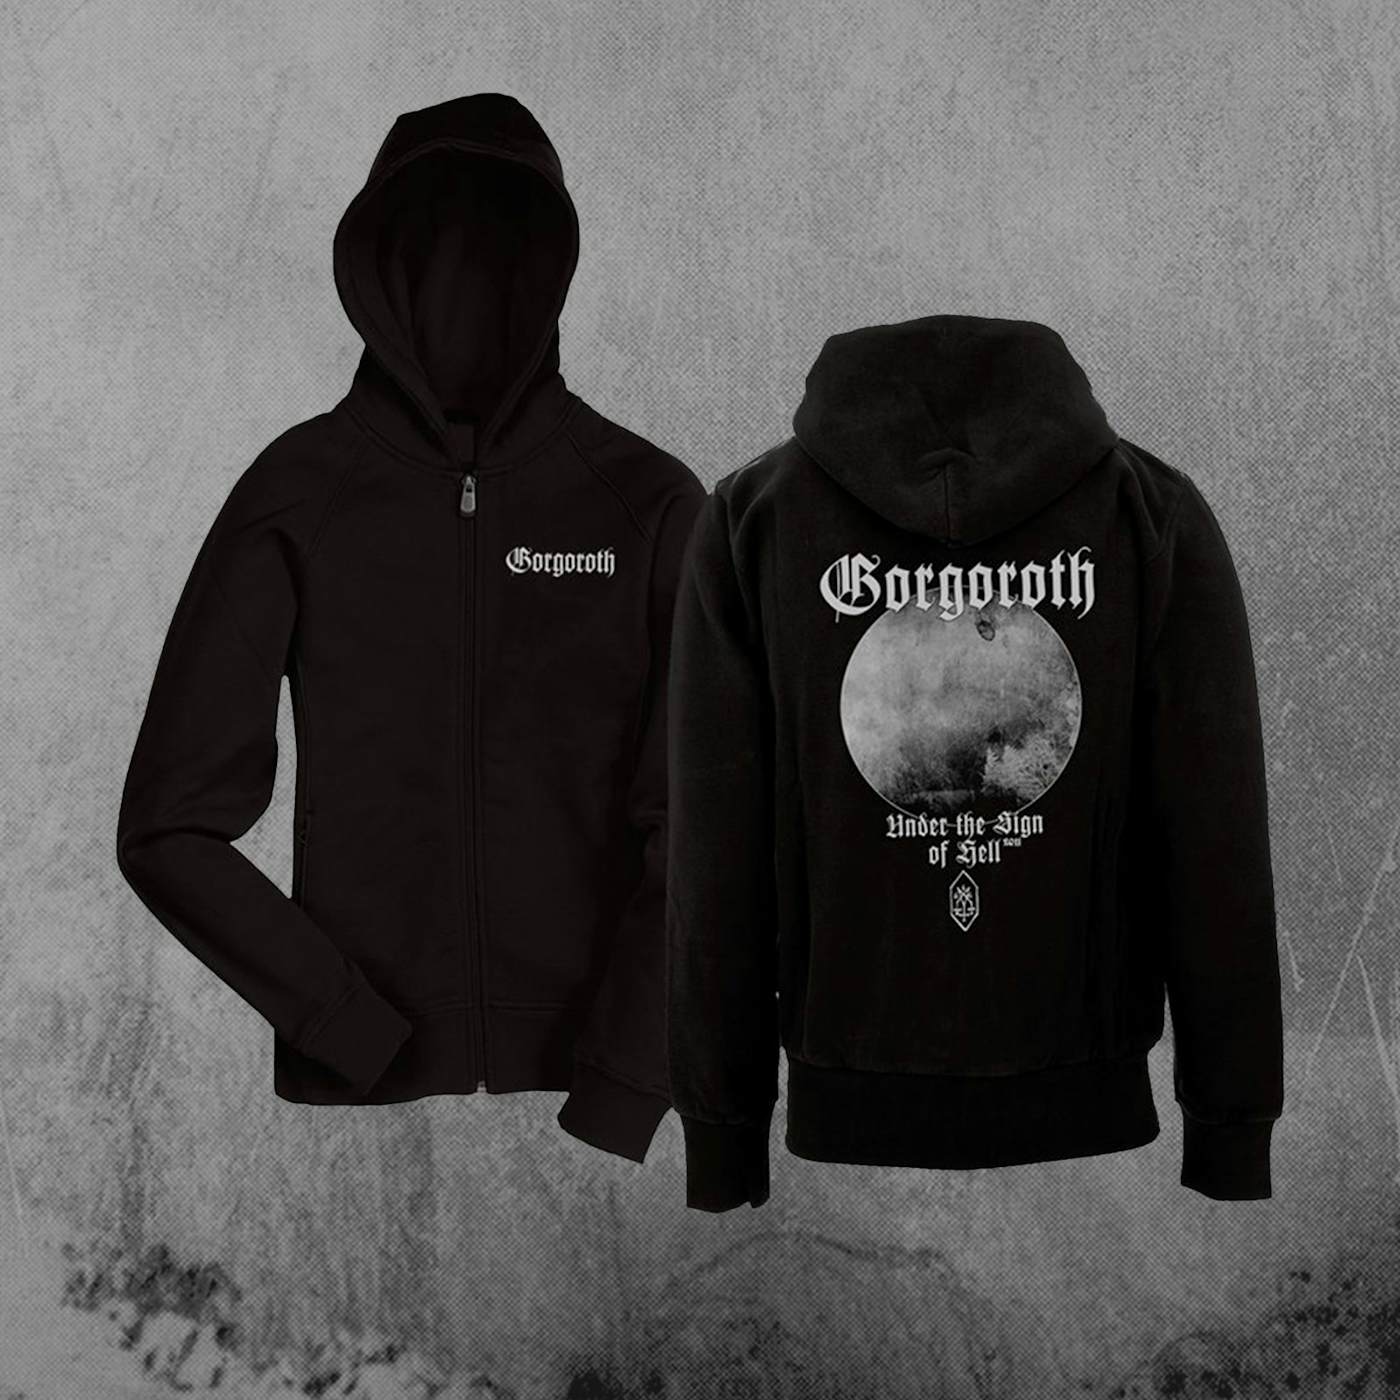 Gorgoroth "Under the sign of hell 2011" Zip Hoodie